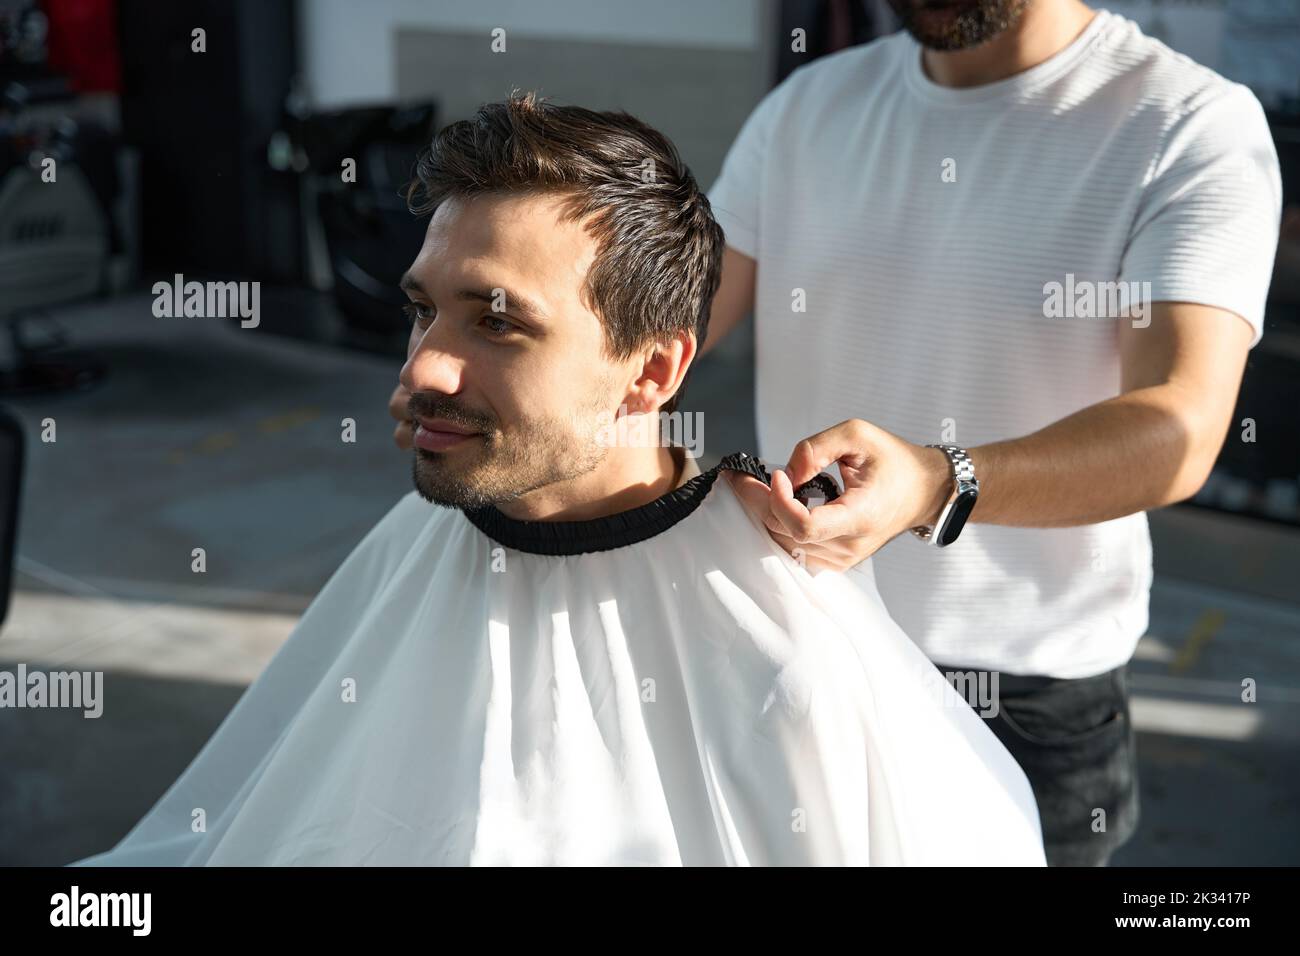 Handsome young man attending a men grooming salon Stock Photo